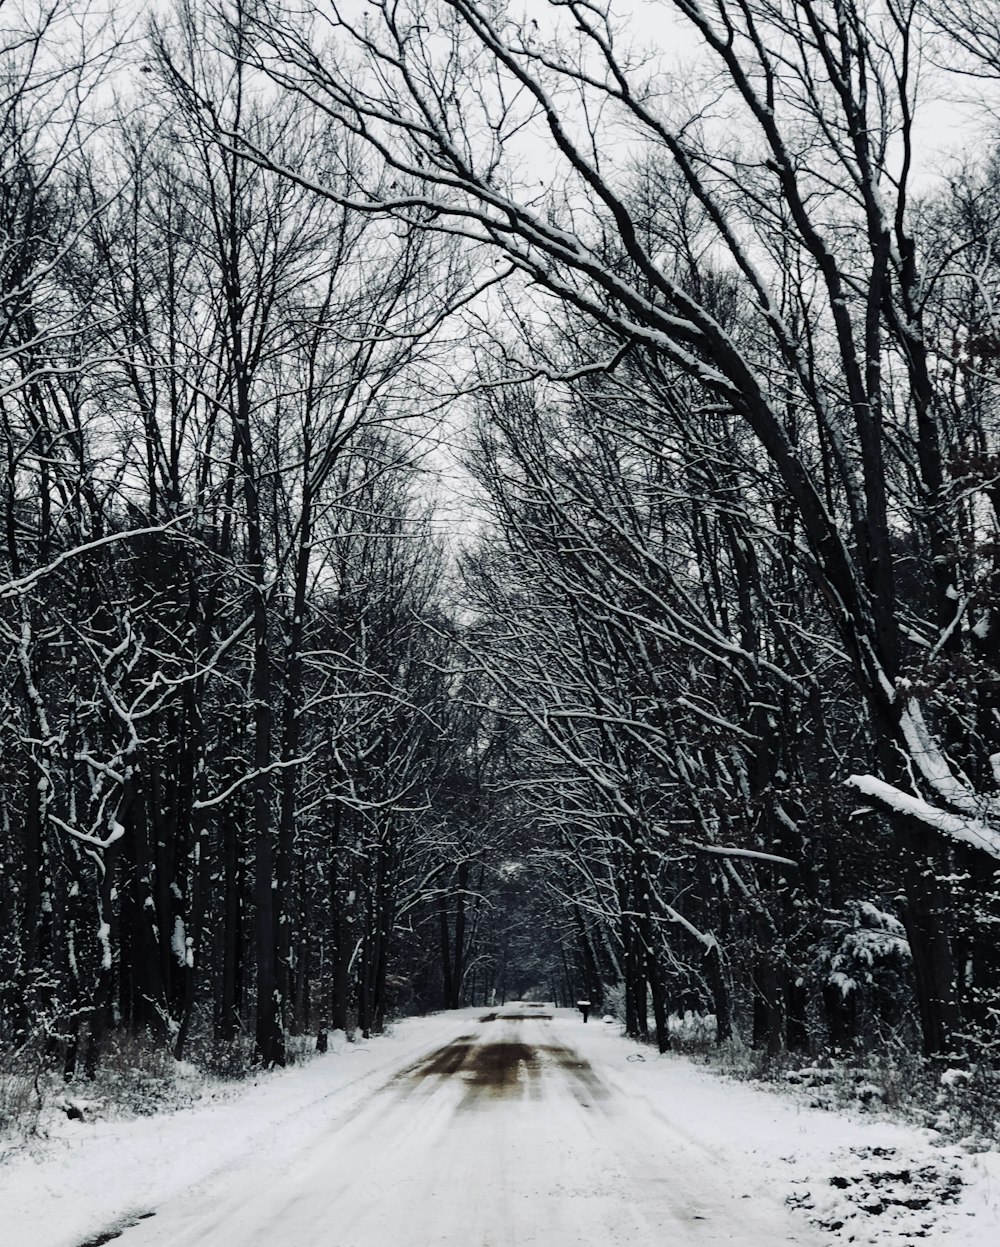 snow covered road in between on trees at daytime